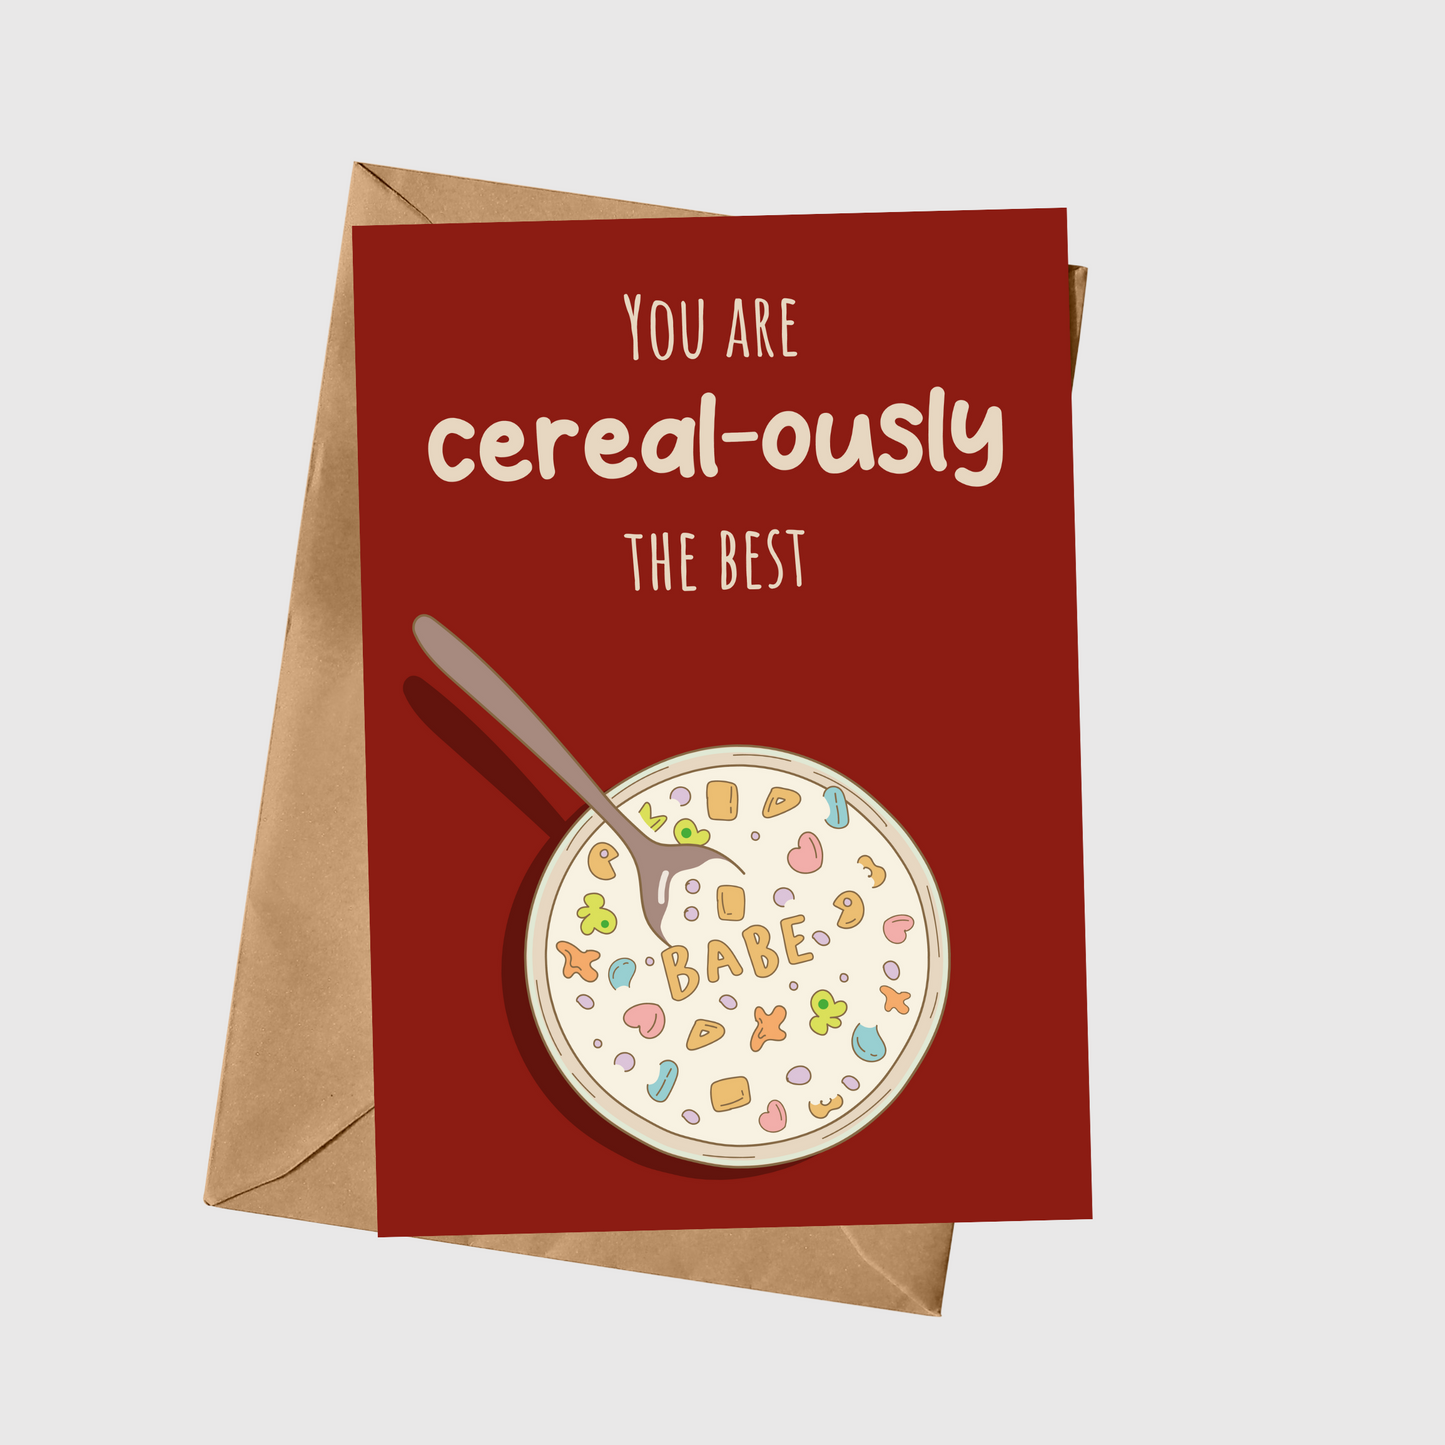 You Are Cereal-ously The Best